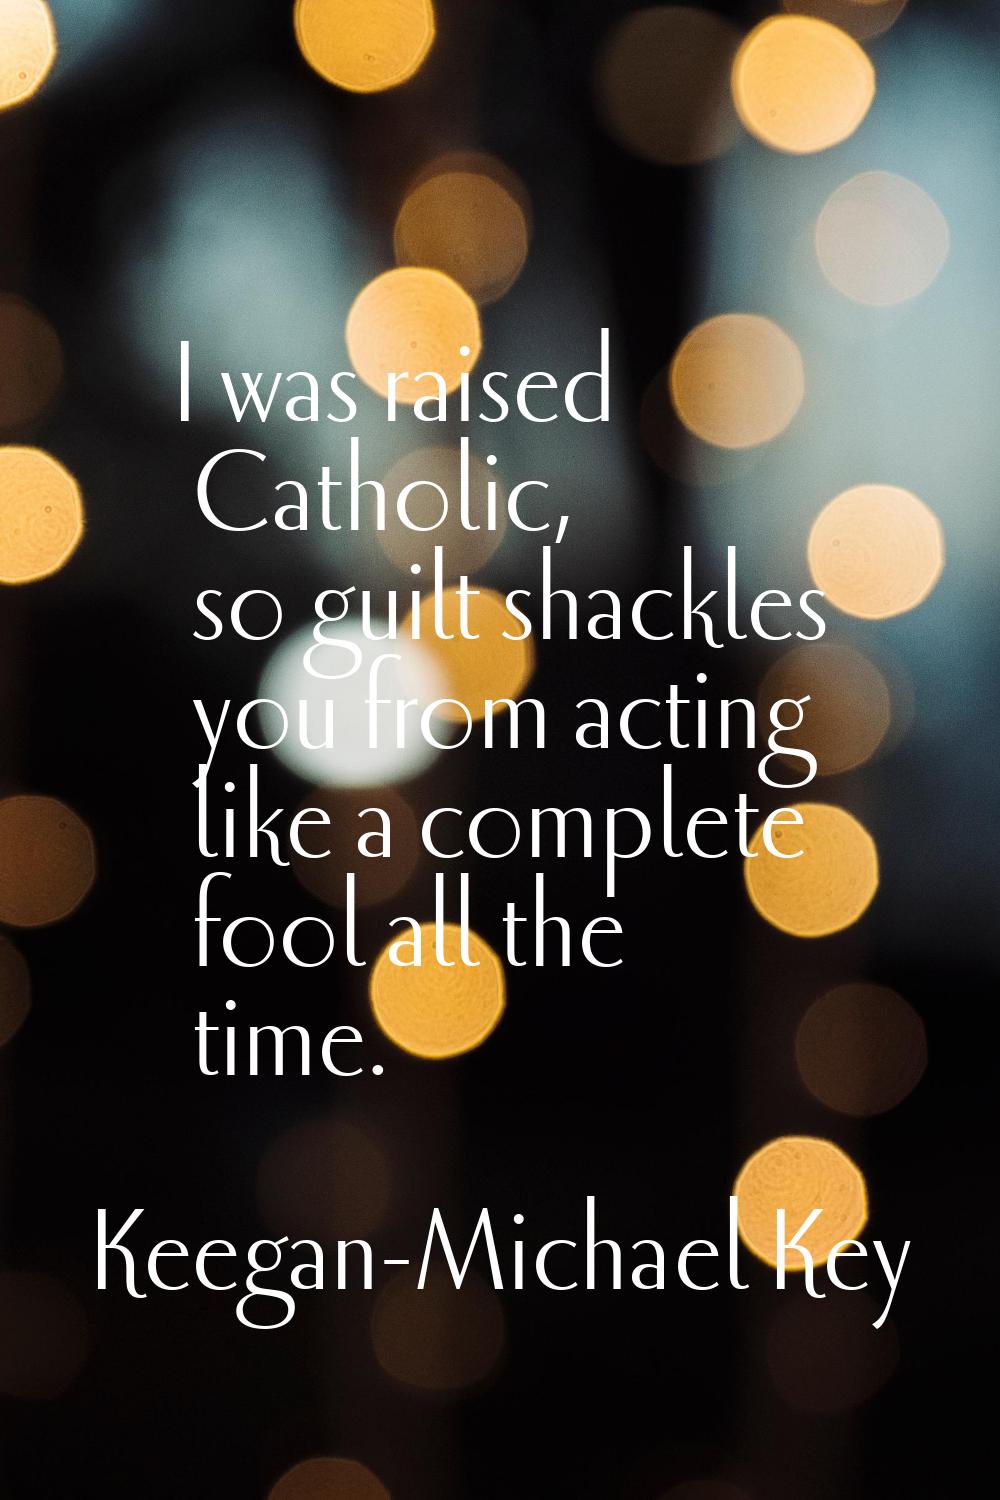 I was raised Catholic, so guilt shackles you from acting like a complete fool all the time.